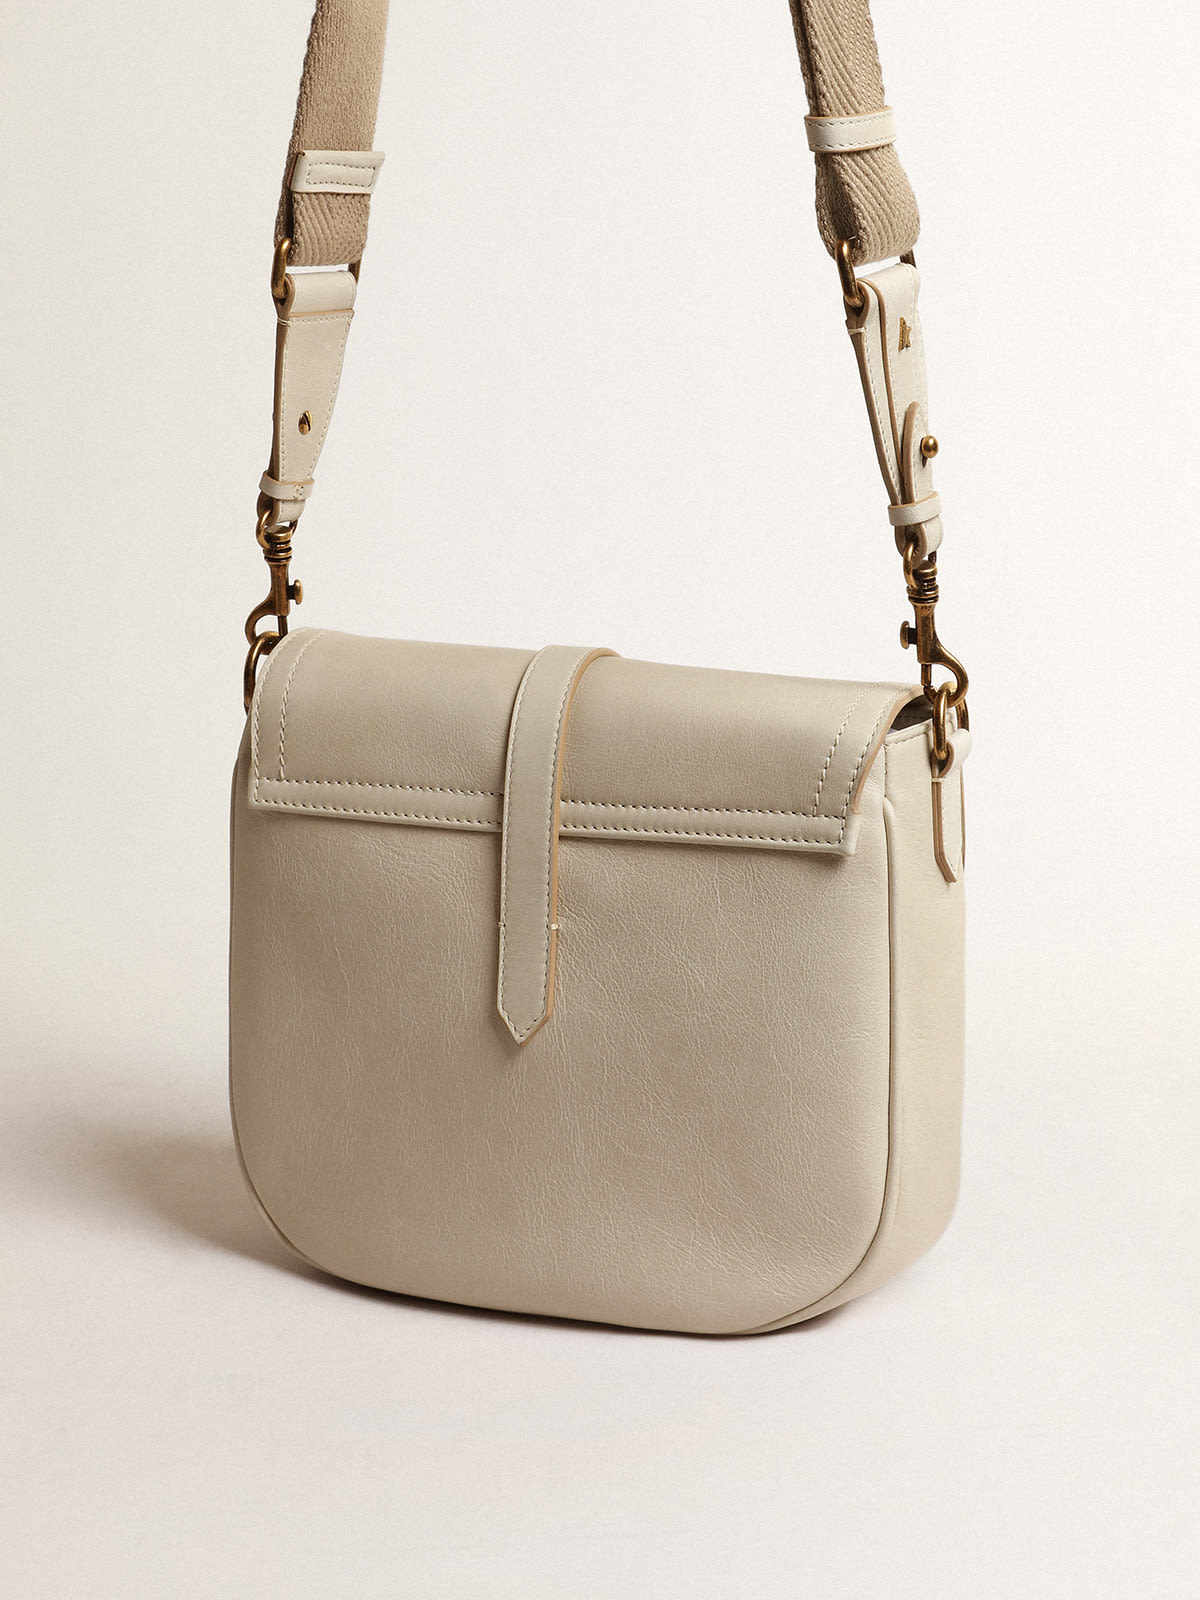 Golden Goose - Medium Sally Bag in porcelain leather with buckle and contrasting shoulder strap in 